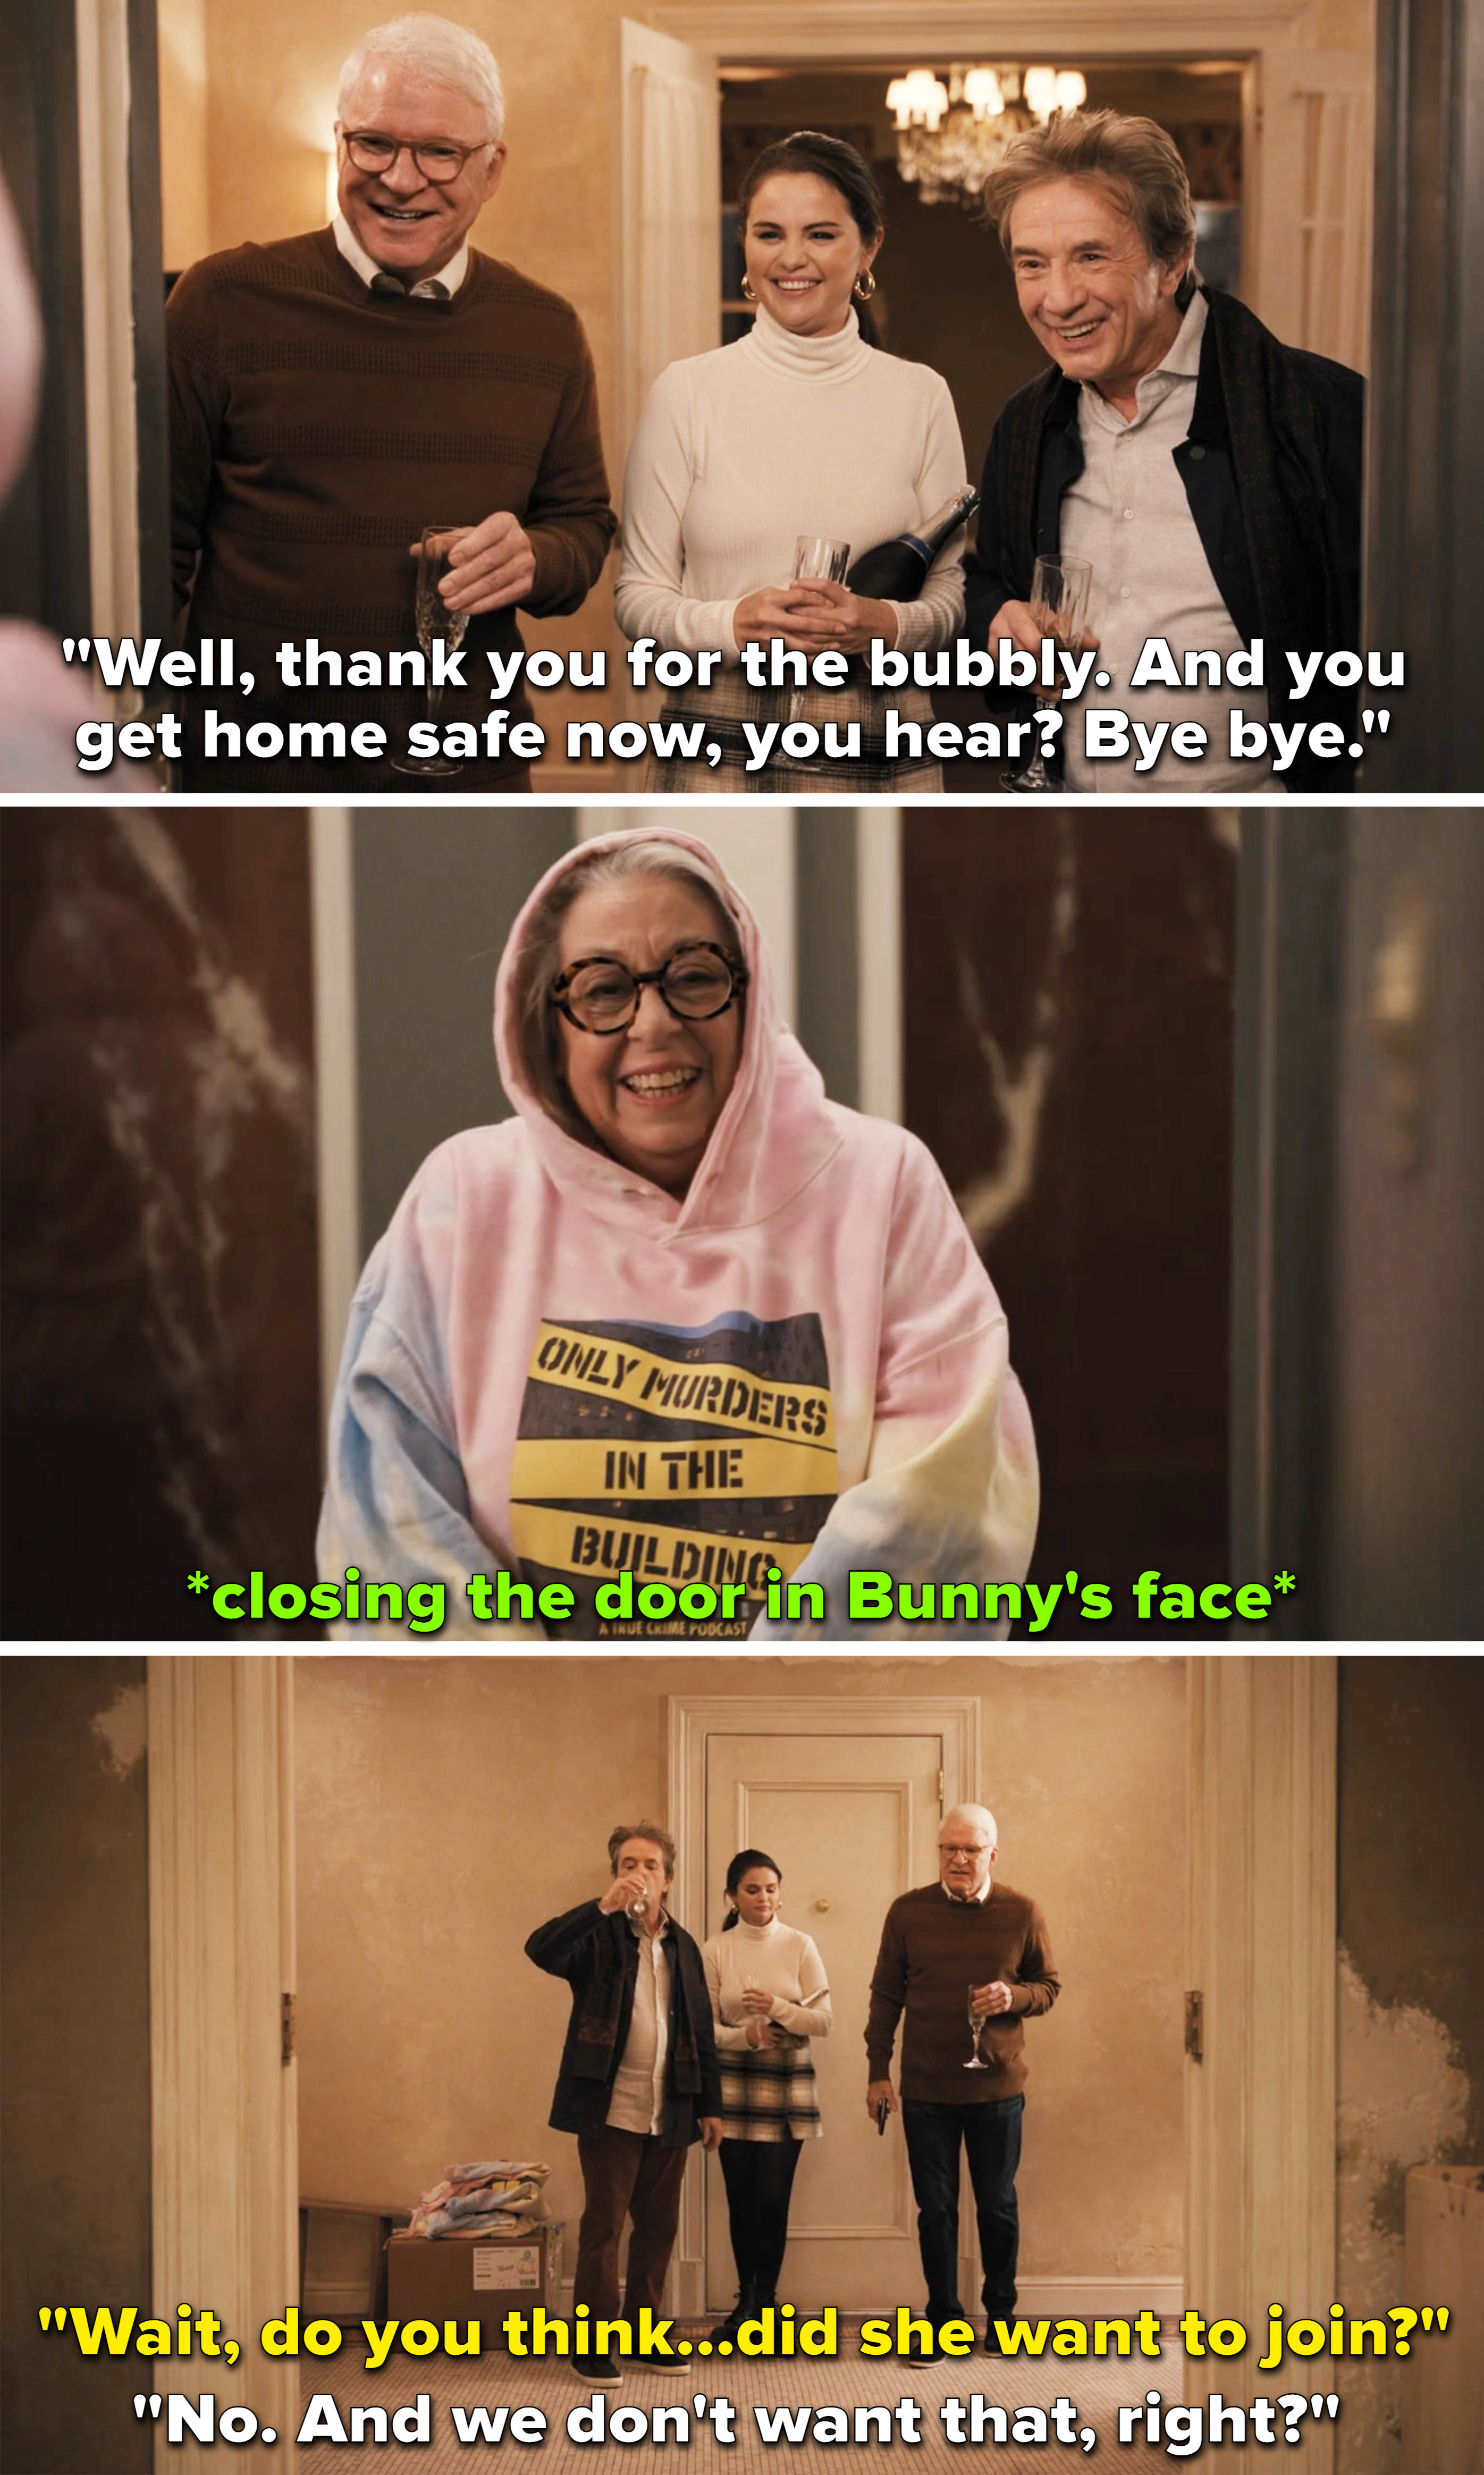 Bunny talking to the three of them and then them closing the door on her and saying have a good day